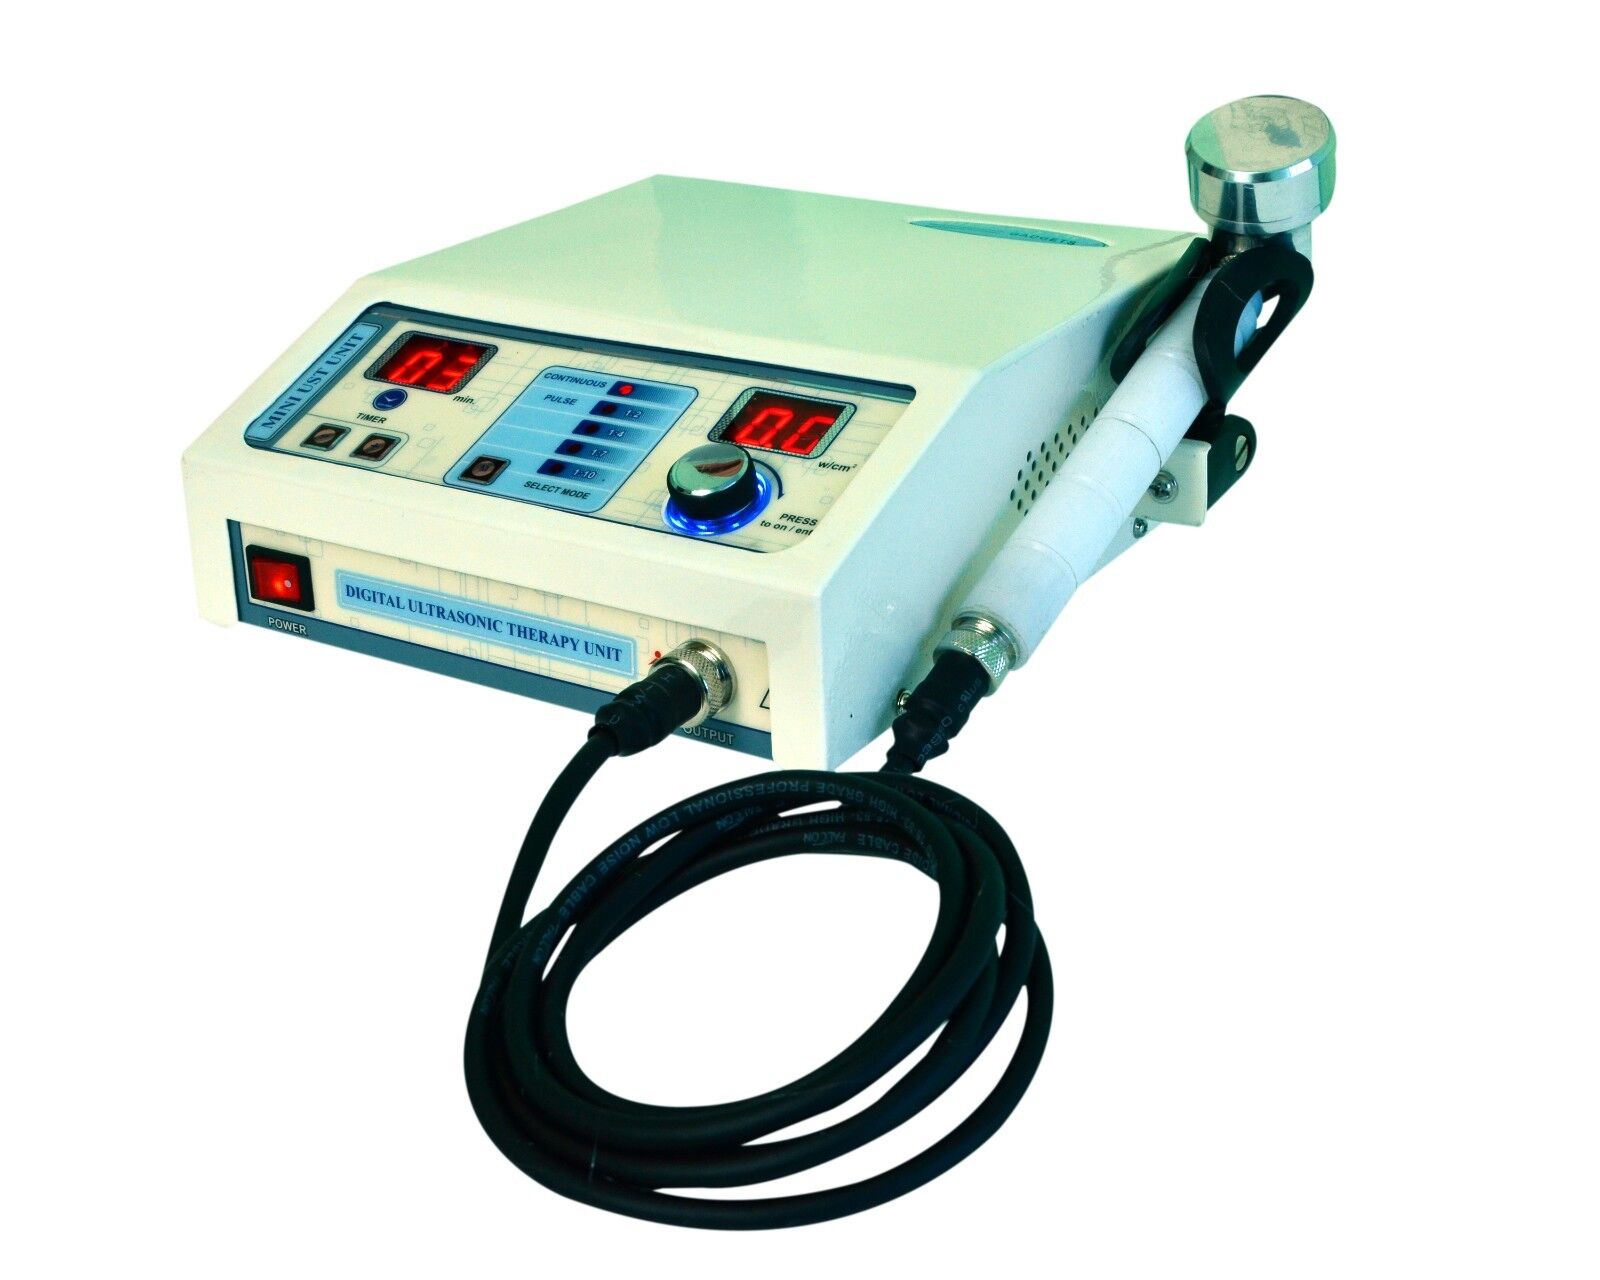 Ultrasonic Ultrasound Therapy machine Physical therapy Get Stress Relief machine